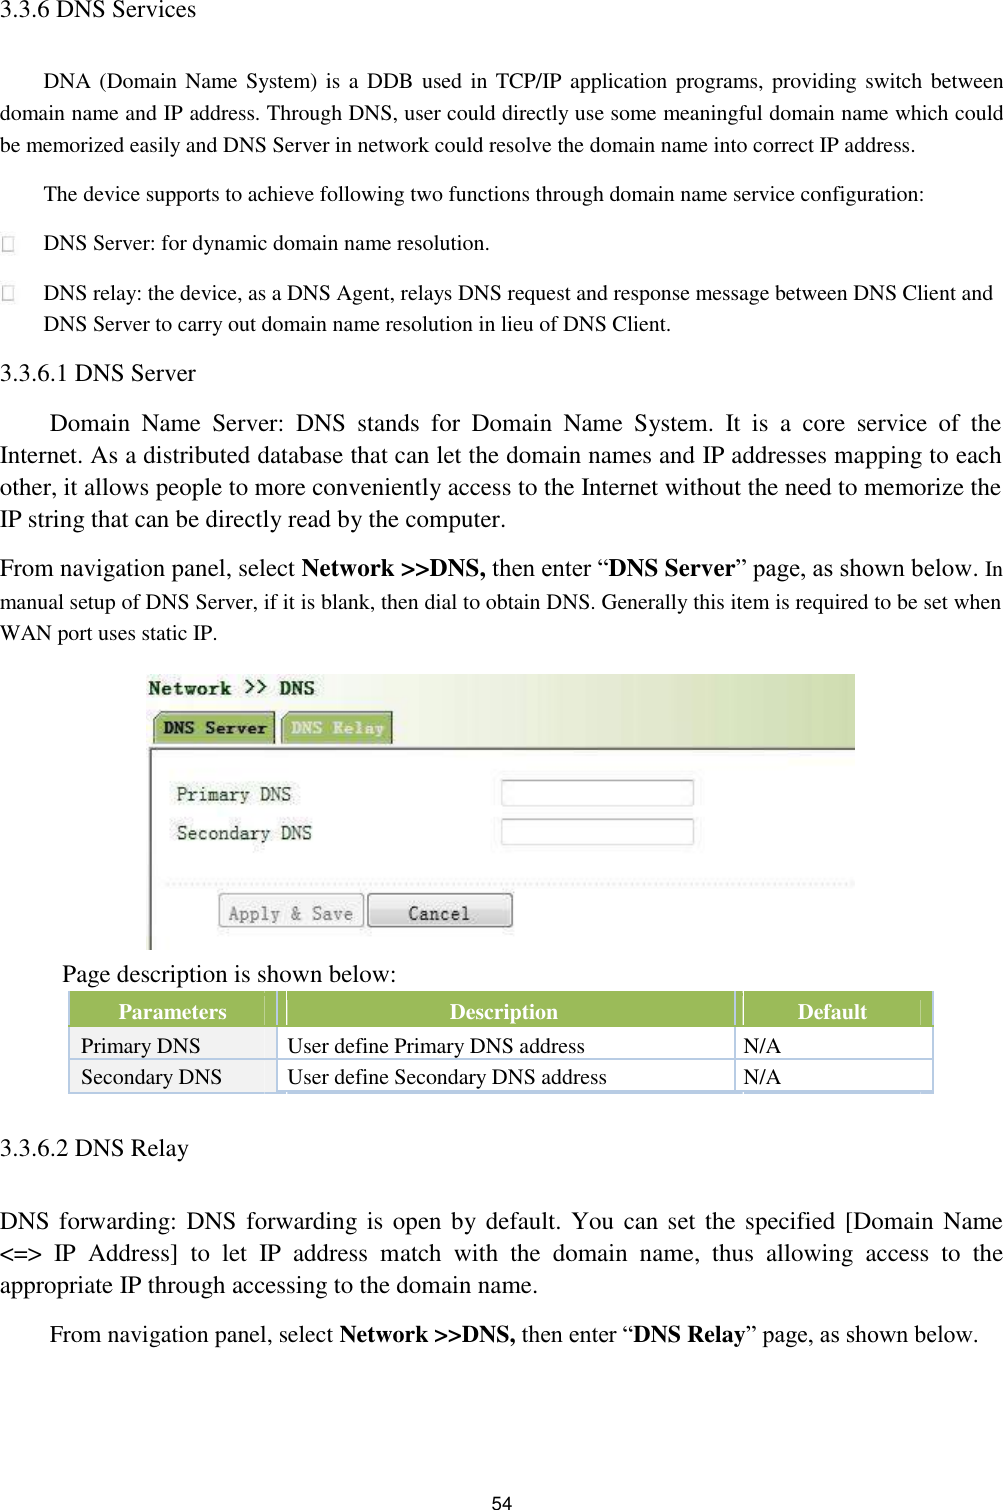 3.3.6 DNS Services   DNA (Domain Name System) is a DDB  used in TCP/IP application programs, providing switch between domain name and IP address. Through DNS, user could directly use some meaningful domain name which could be memorized easily and DNS Server in network could resolve the domain name into correct IP address.  The device supports to achieve following two functions through domain name service configuration:  DNS Server: for dynamic domain name resolution.  DNS relay: the device, as a DNS Agent, relays DNS request and response message between DNS Client and DNS Server to carry out domain name resolution in lieu of DNS Client.  3.3.6.1 DNS Server  Domain  Name  Server:  DNS  stands  for  Domain  Name  System.  It  is  a  core  service  of  the Internet. As a distributed database that can let the domain names and IP addresses mapping to each other, it allows people to more conveniently access to the Internet without the need to memorize the IP string that can be directly read by the computer.  From navigation panel, select Network &gt;&gt;DNS, then enter “DNS Server” page, as shown below. In  manual setup of DNS Server, if it is blank, then dial to obtain DNS. Generally this item is required to be set when WAN port uses static IP.               Page description is shown below:   Parameters   Description   Default         Primary DNS   User define Primary DNS address  N/A  Secondary DNS   User define Secondary DNS address  N/A           3.3.6.2 DNS Relay   DNS forwarding: DNS forwarding is open by default. You can set the specified [Domain Name &lt;=&gt;  IP  Address]  to  let  IP  address  match  with  the  domain  name,  thus  allowing  access  to  the appropriate IP through accessing to the domain name.  From navigation panel, select Network &gt;&gt;DNS, then enter “DNS Relay” page, as shown below.       54 